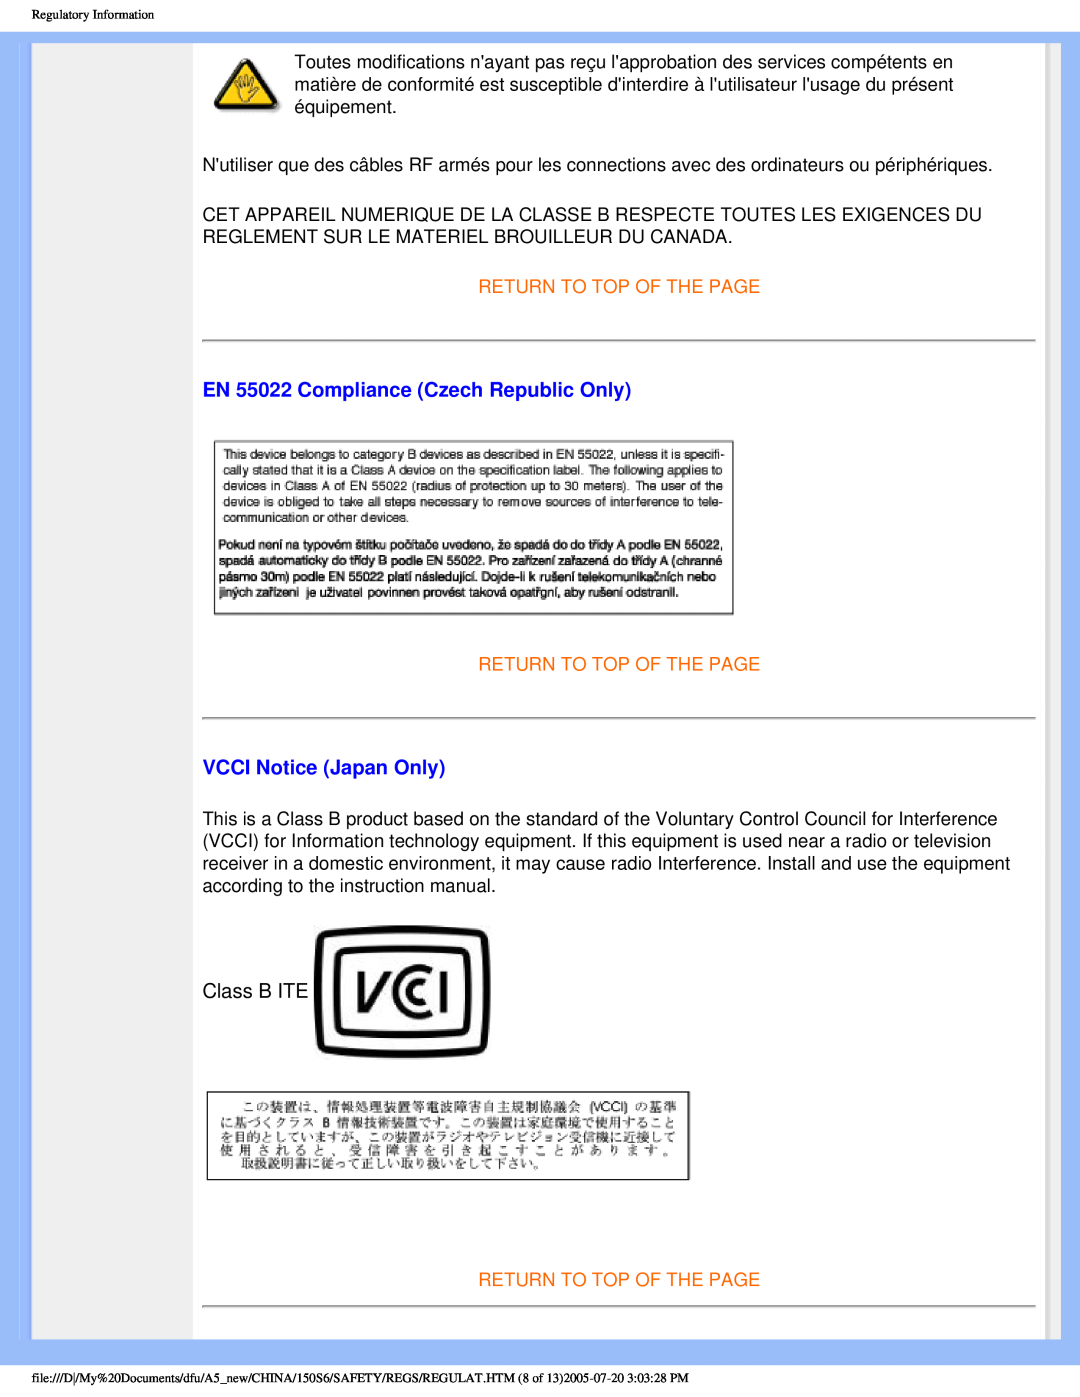 Philips 15056 user manual EN 55022 Compliance Czech Republic Only, VCCI Notice Japan Only, Return To Top Of The Page 